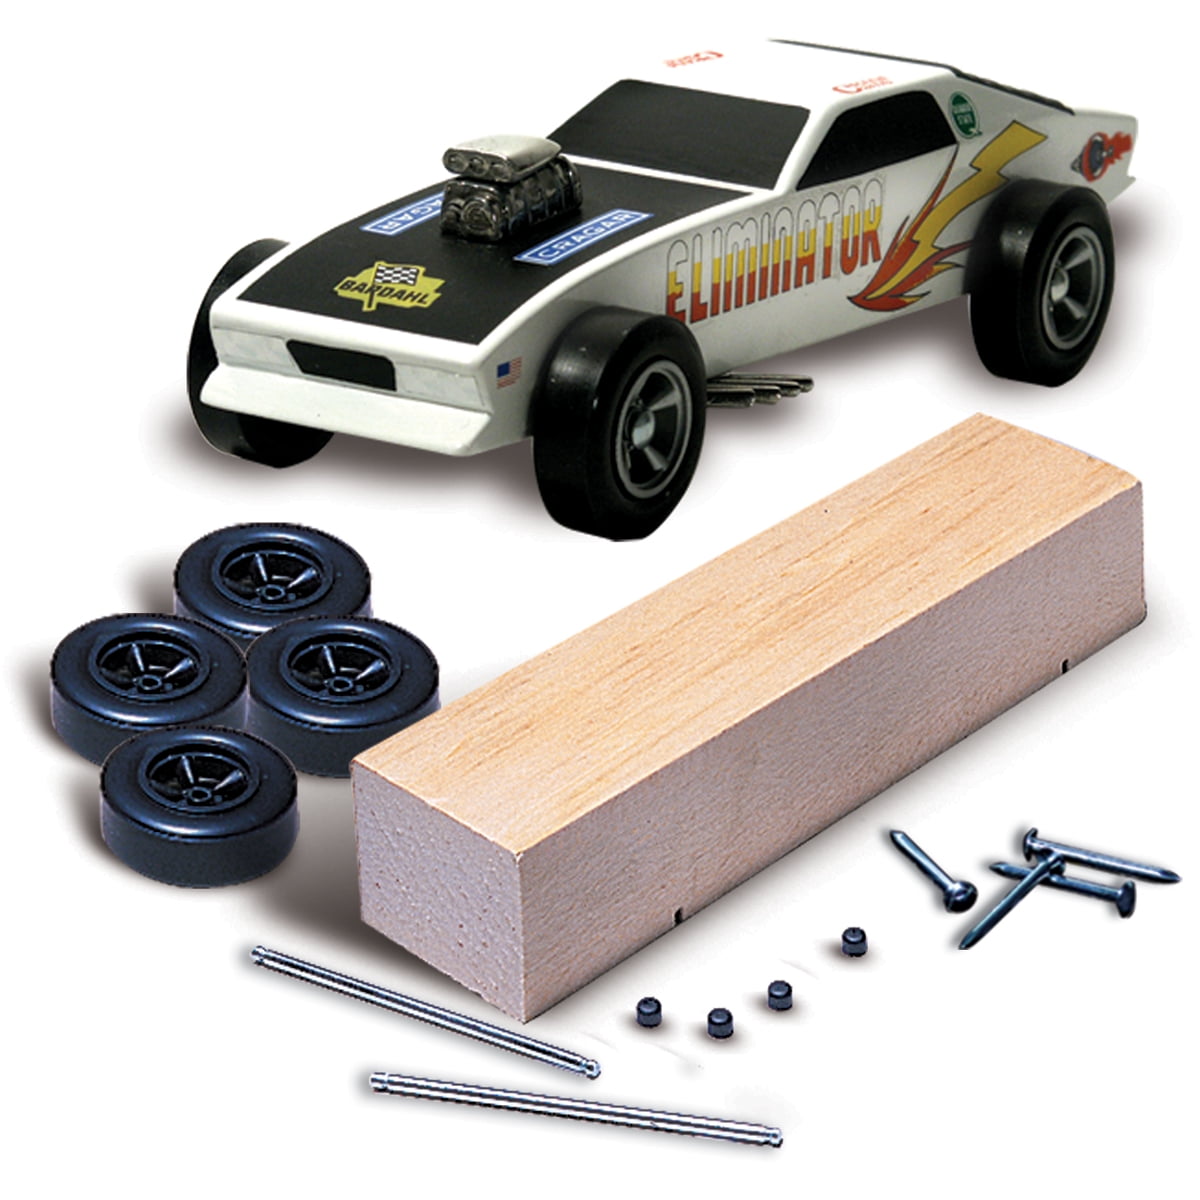 Woodland Scenics Pine Car Derby Racer Shaping Tools